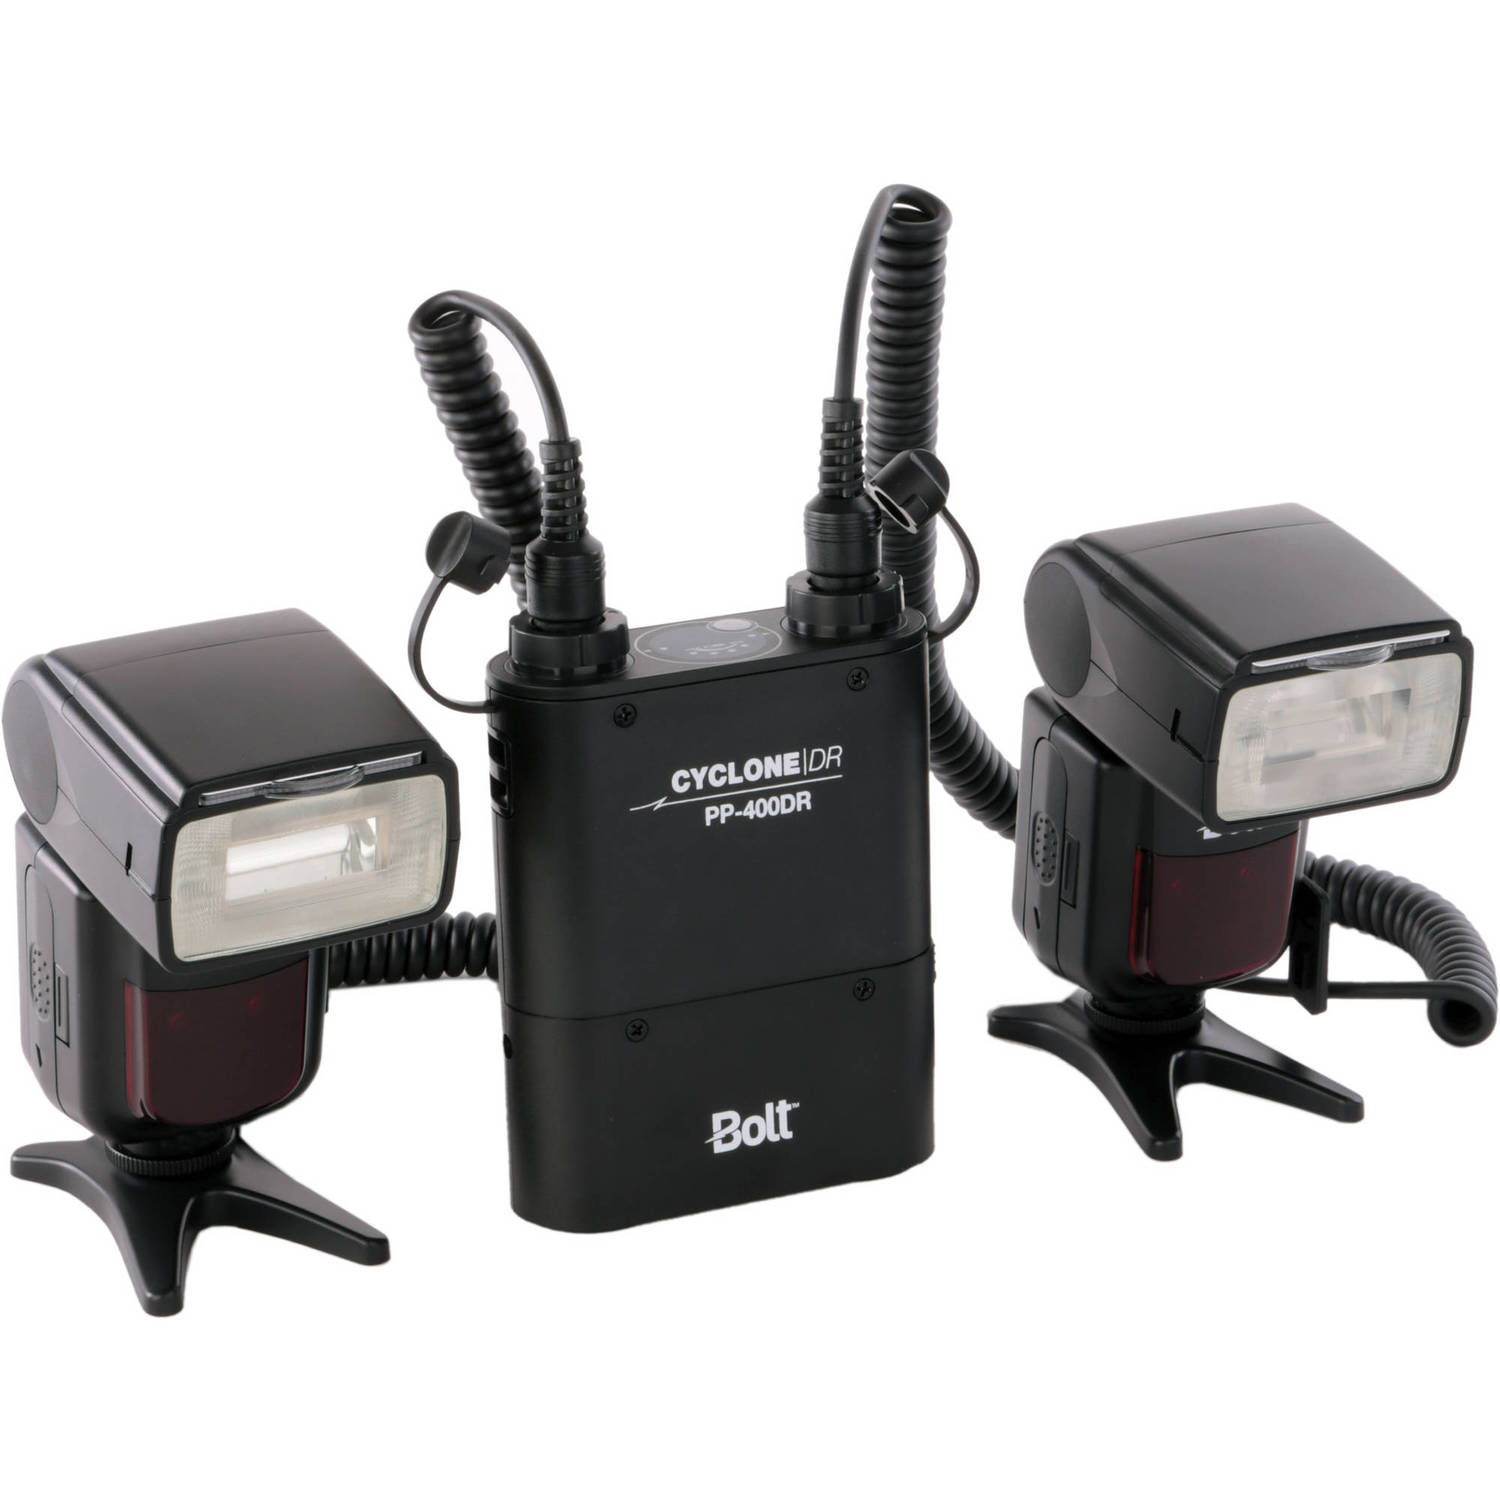 Bolt Cz2 Hv Locking Flash Power Cable For Select Canon Flash Units